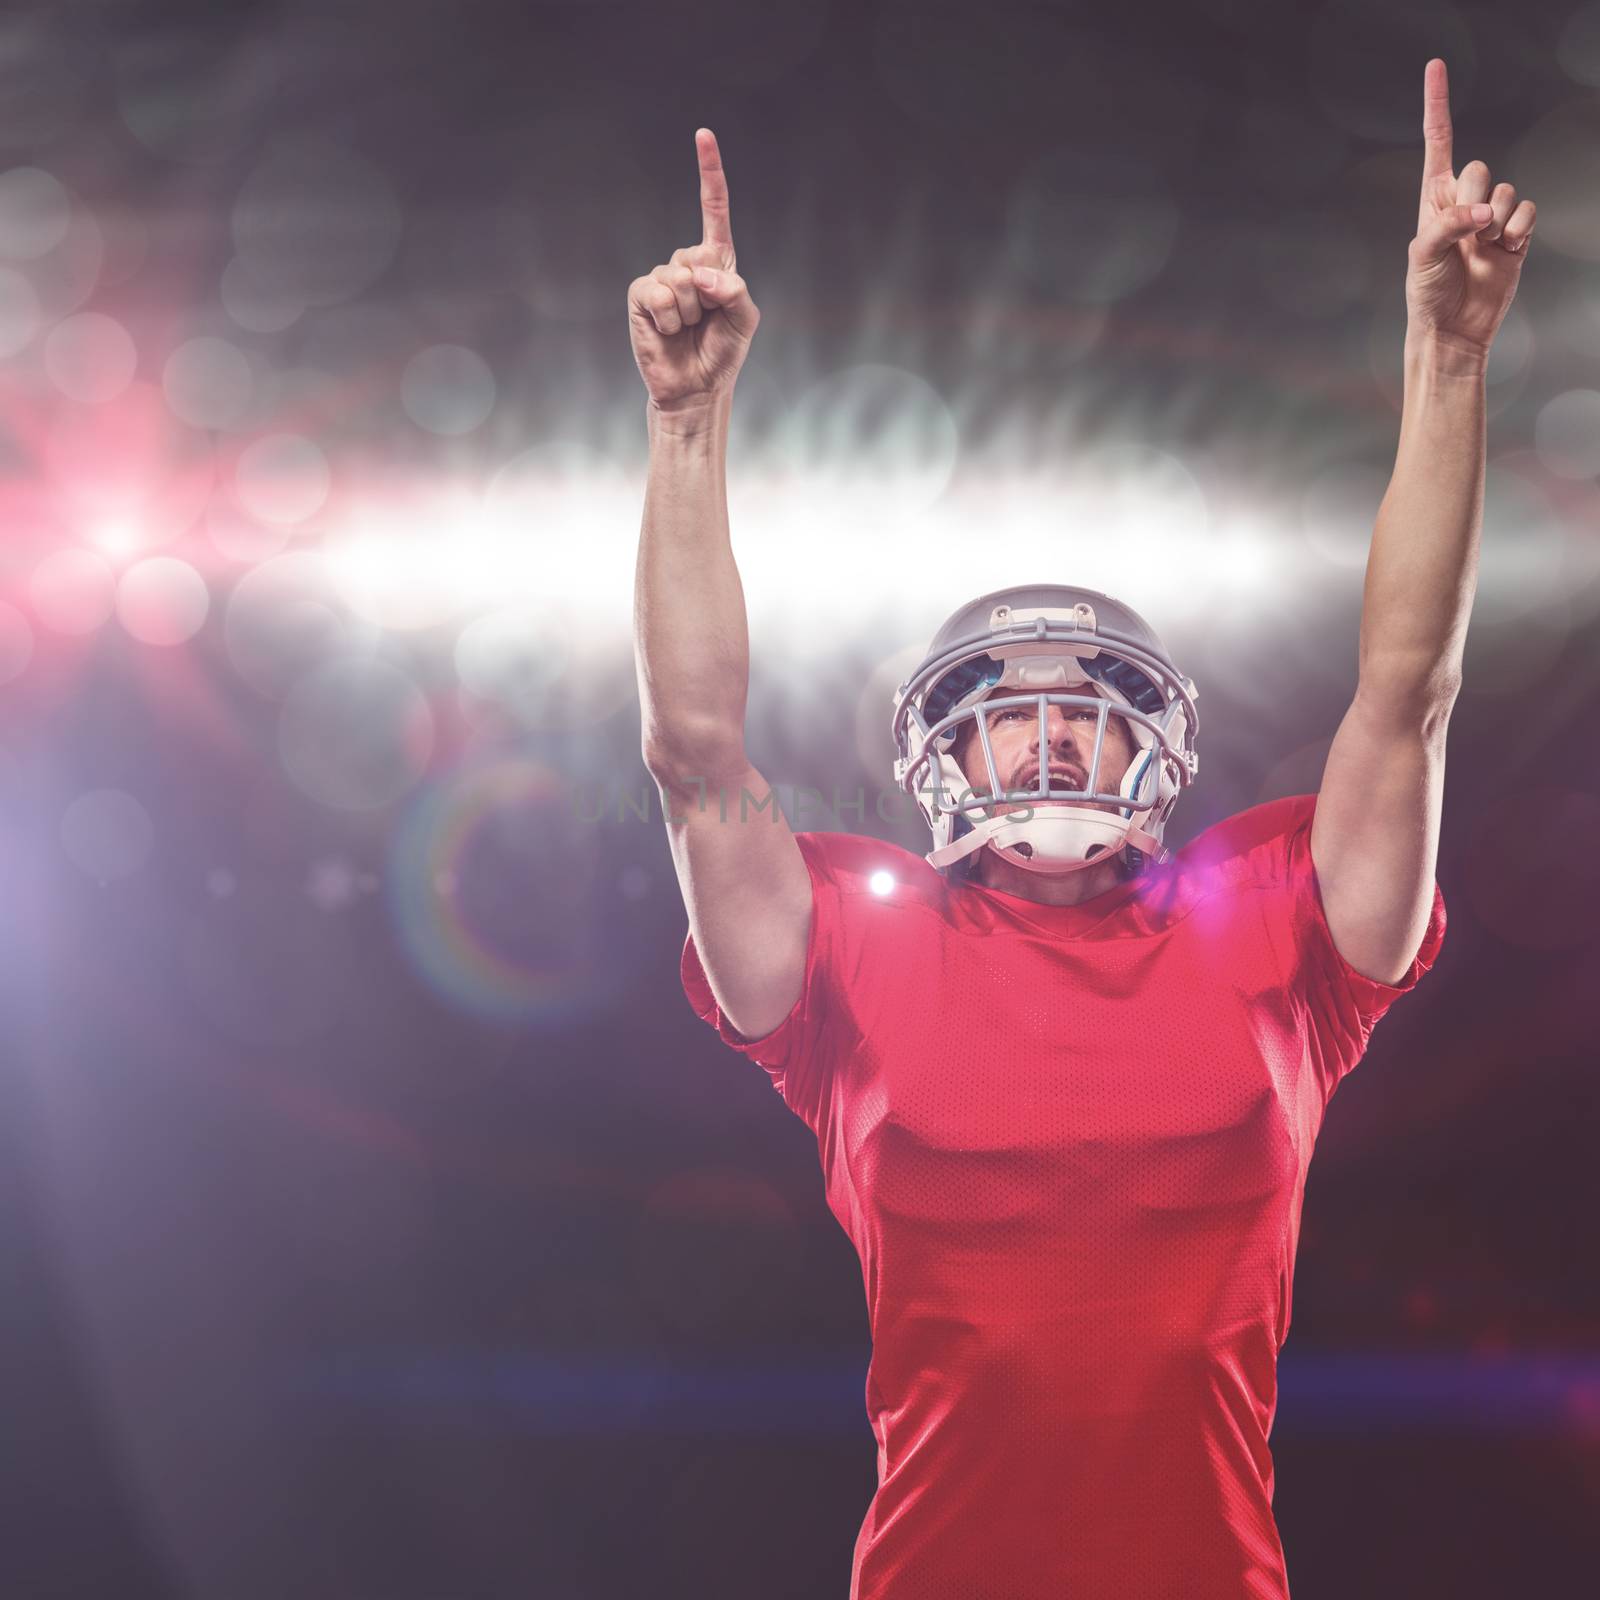 American football player looking up with arms raised against spotlights